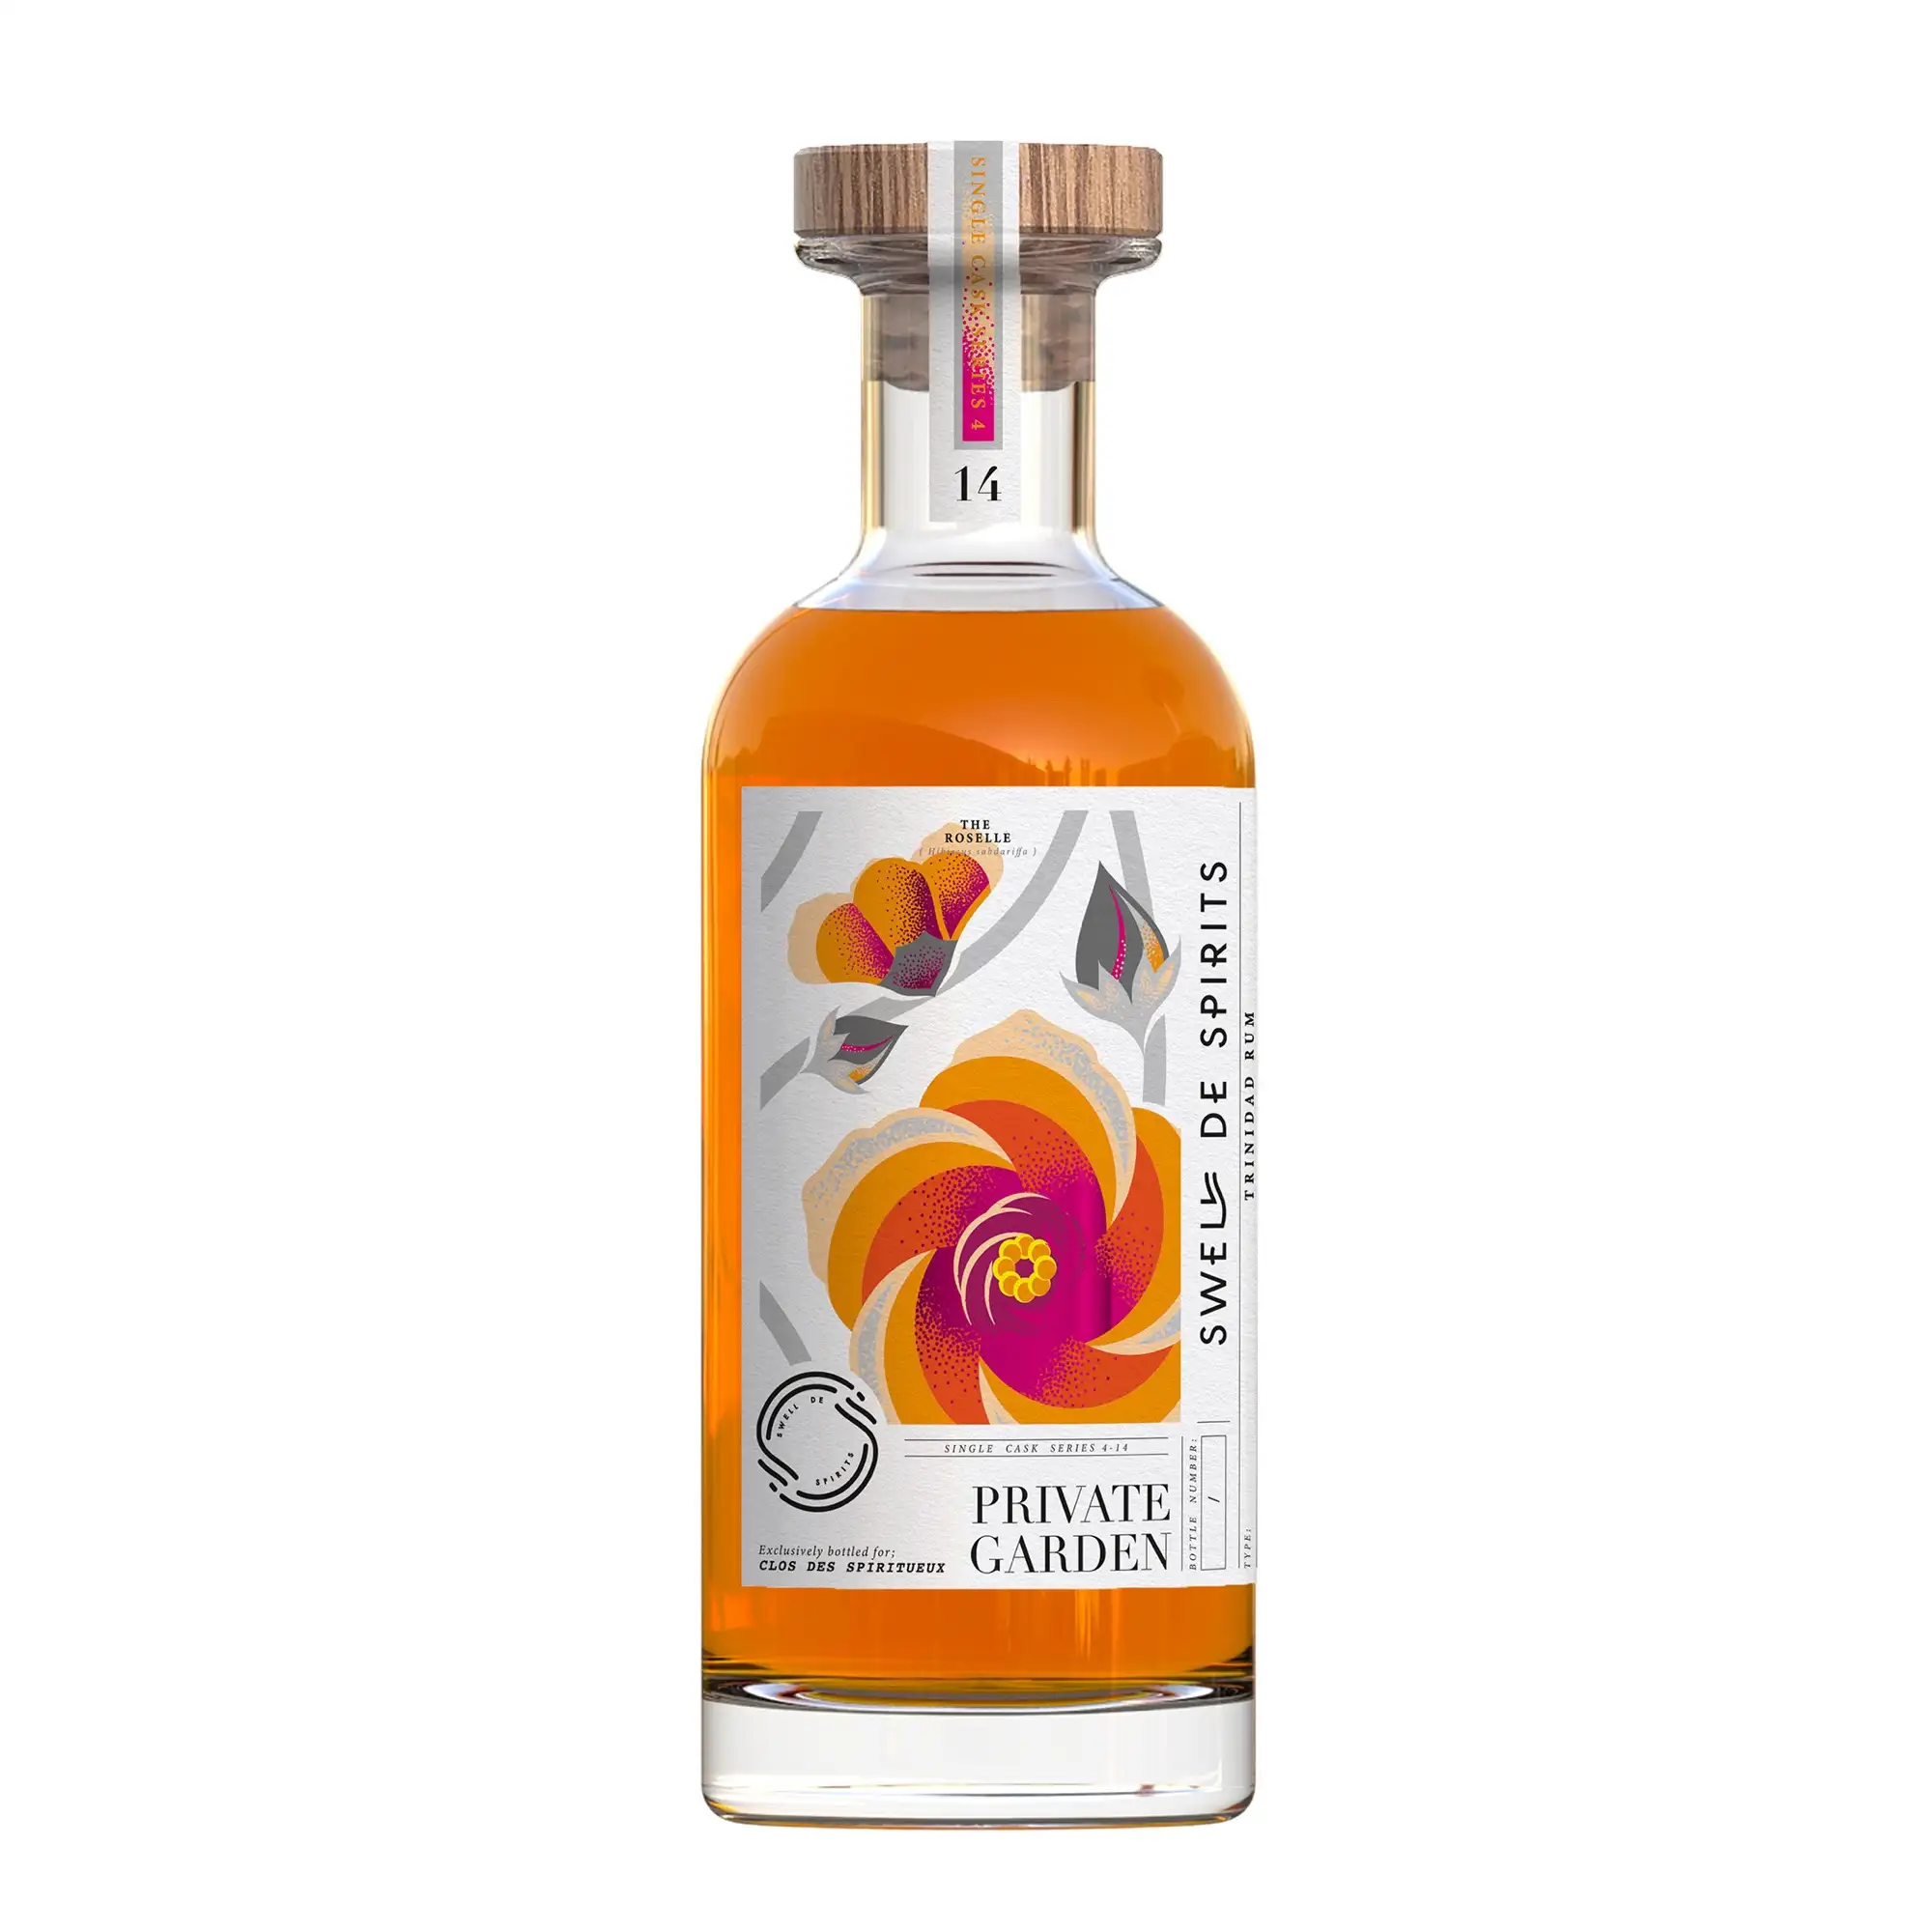 Image of the front of the bottle of the rum Private Garden No. 14 (Clos des Spiritueux)